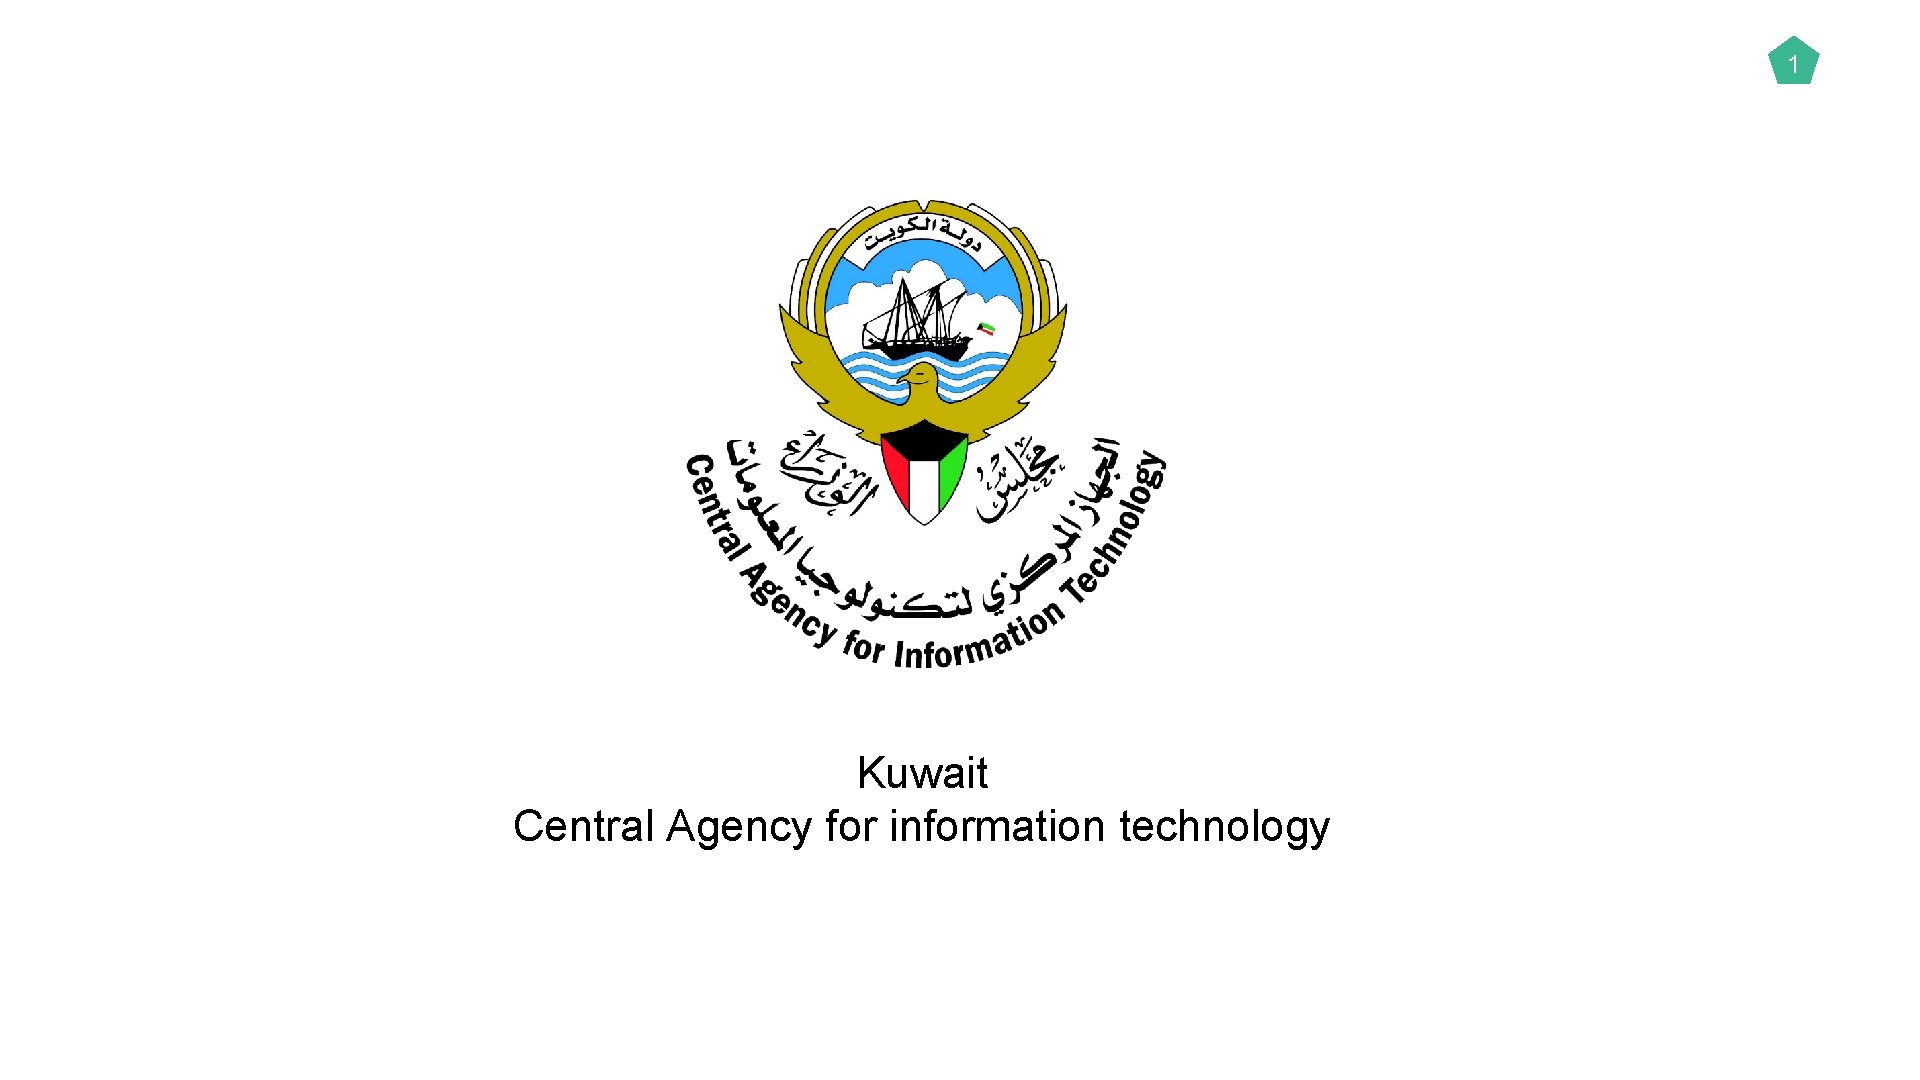 1 Kuwait Central Agency for information technology 